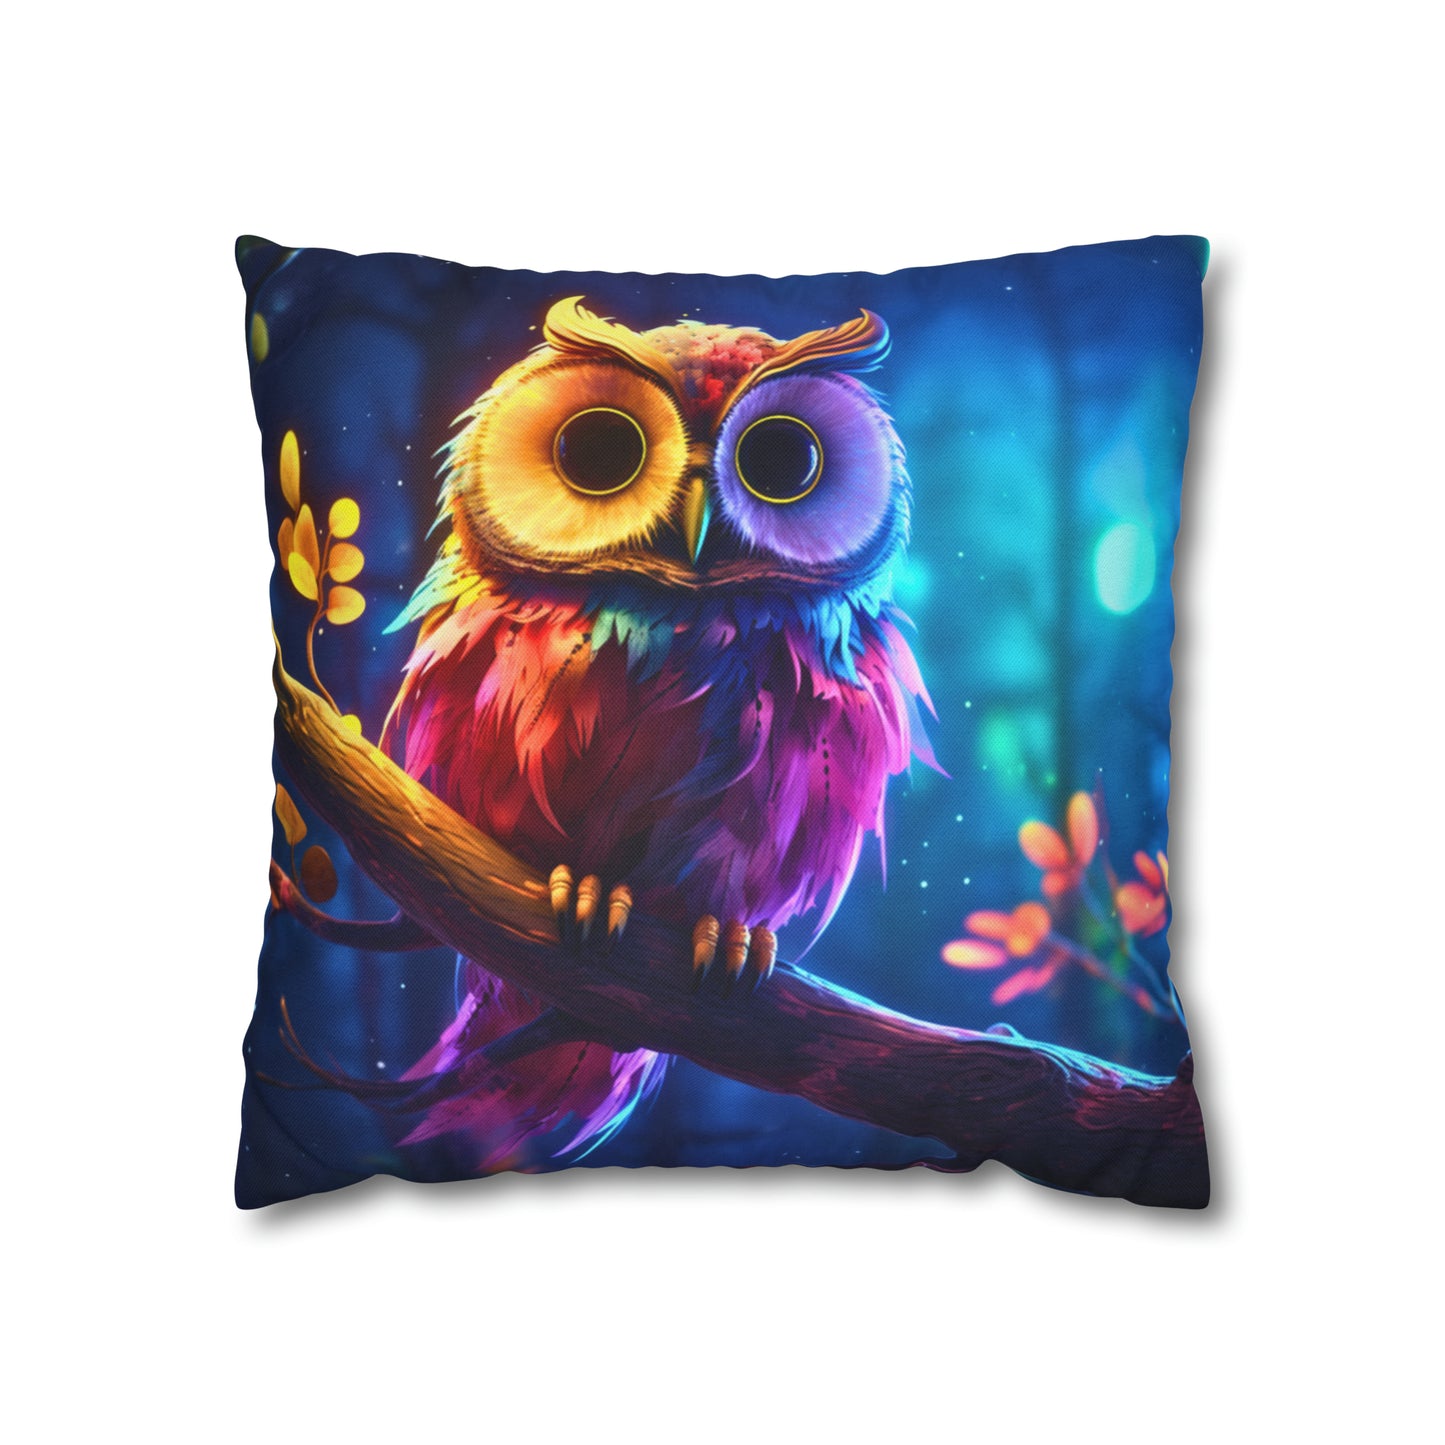 Square Pillow - The Owl Who Stole the Moon